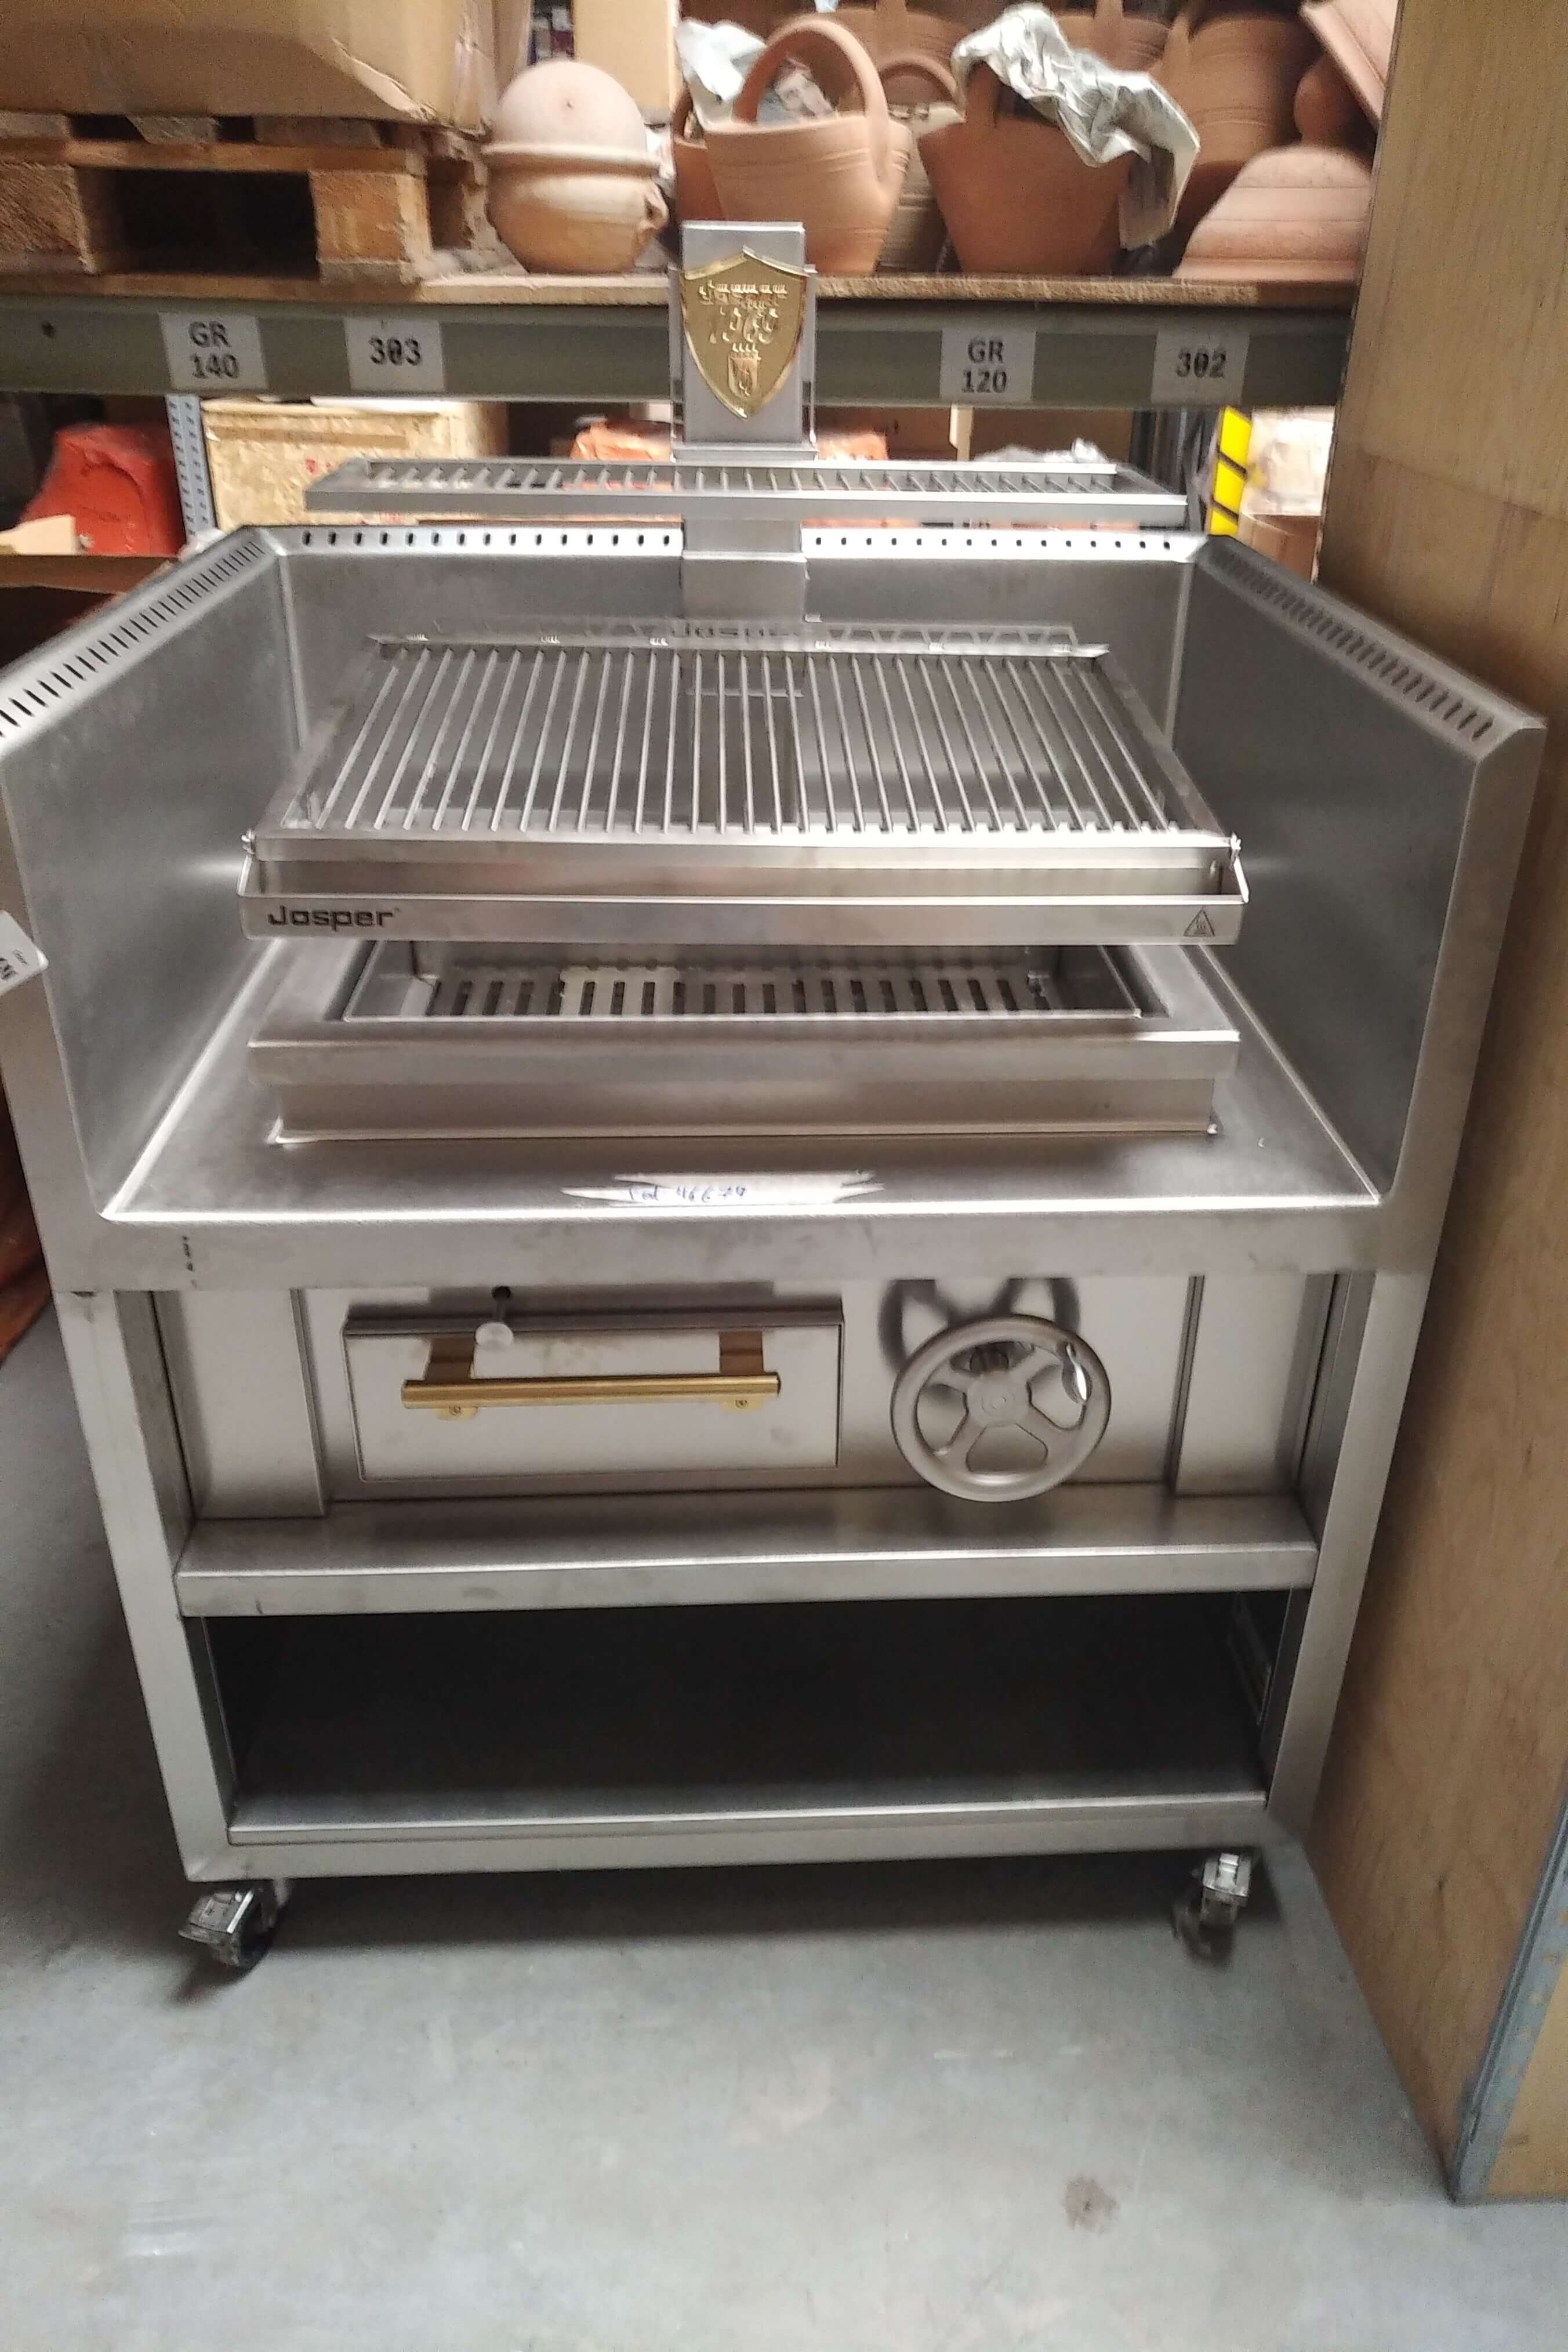 Basque grill from Josper with table, a grill 50cm wide